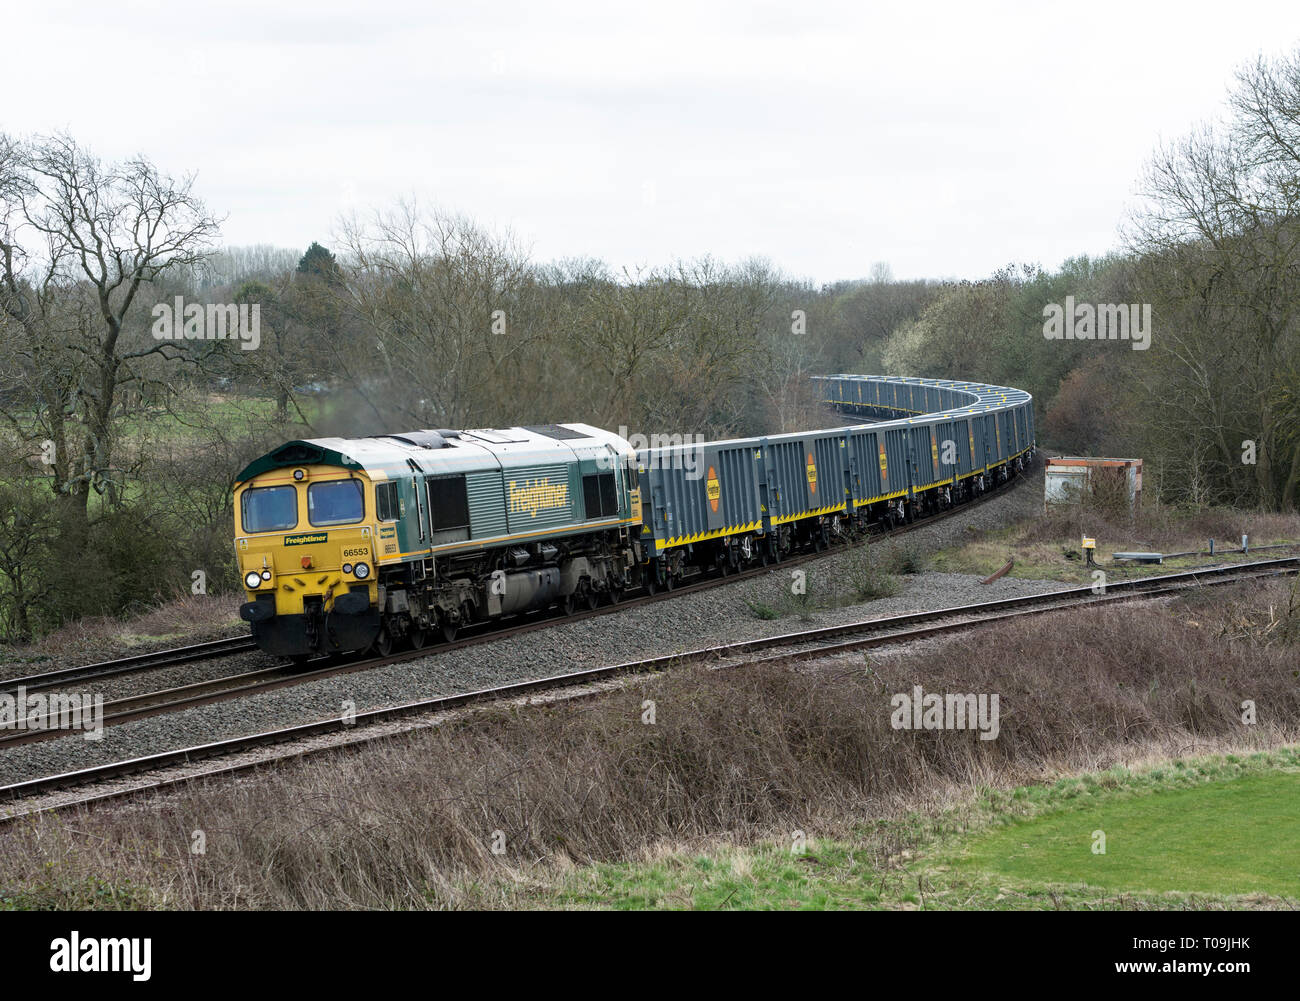 Class 66 diesel locomotive pulling new Freightliner hoppers at Hatton North Junction, Warwickshire, UK Stock Photo